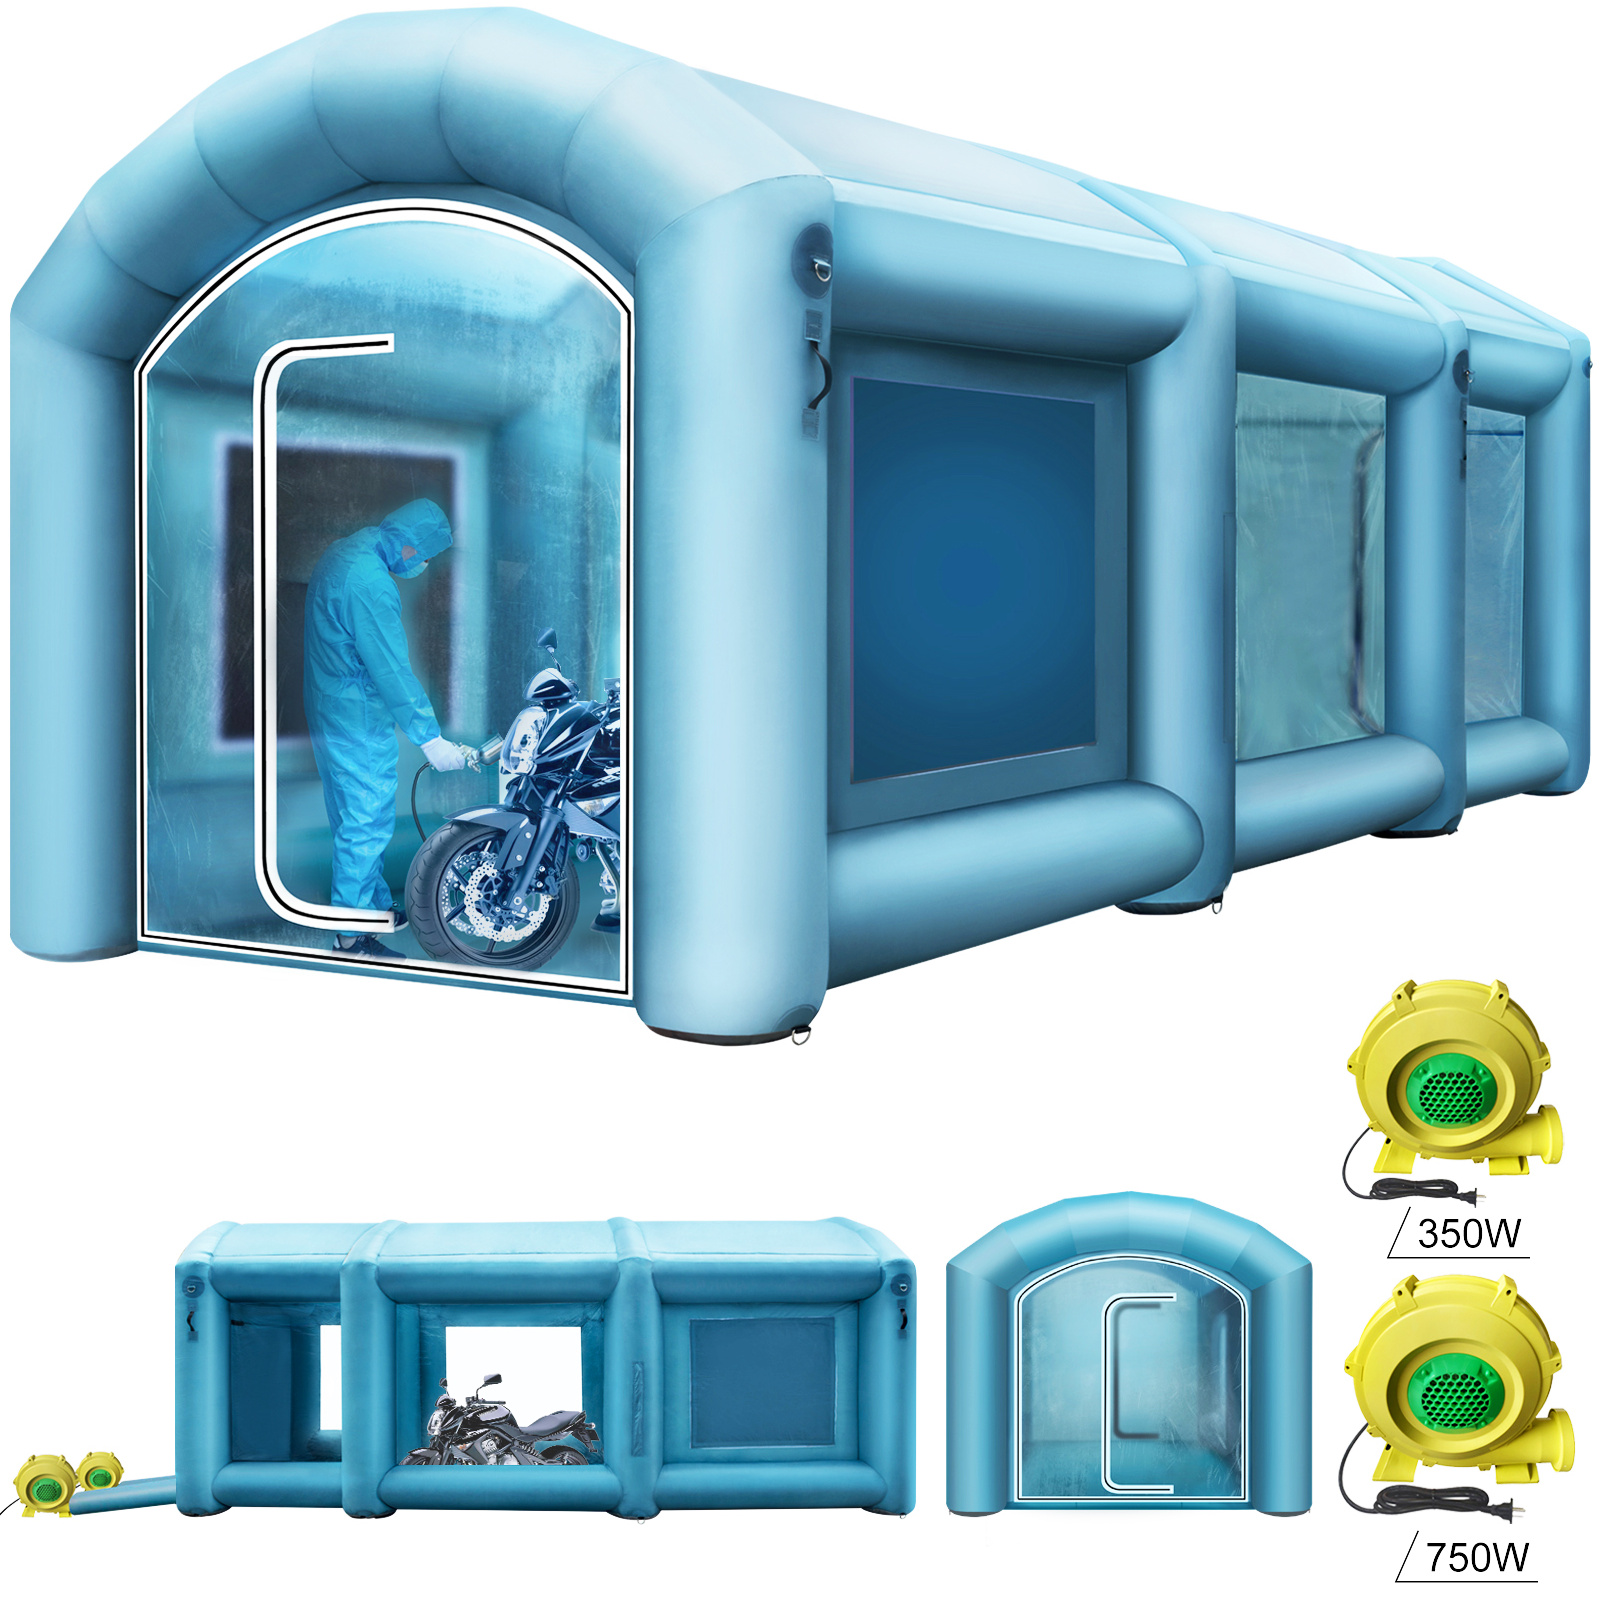 Inflatable Paint Booth Spray Paint Tent 20x10x8ft w/Air Filter 750W+350W Blowers от Vevor Many GEOs